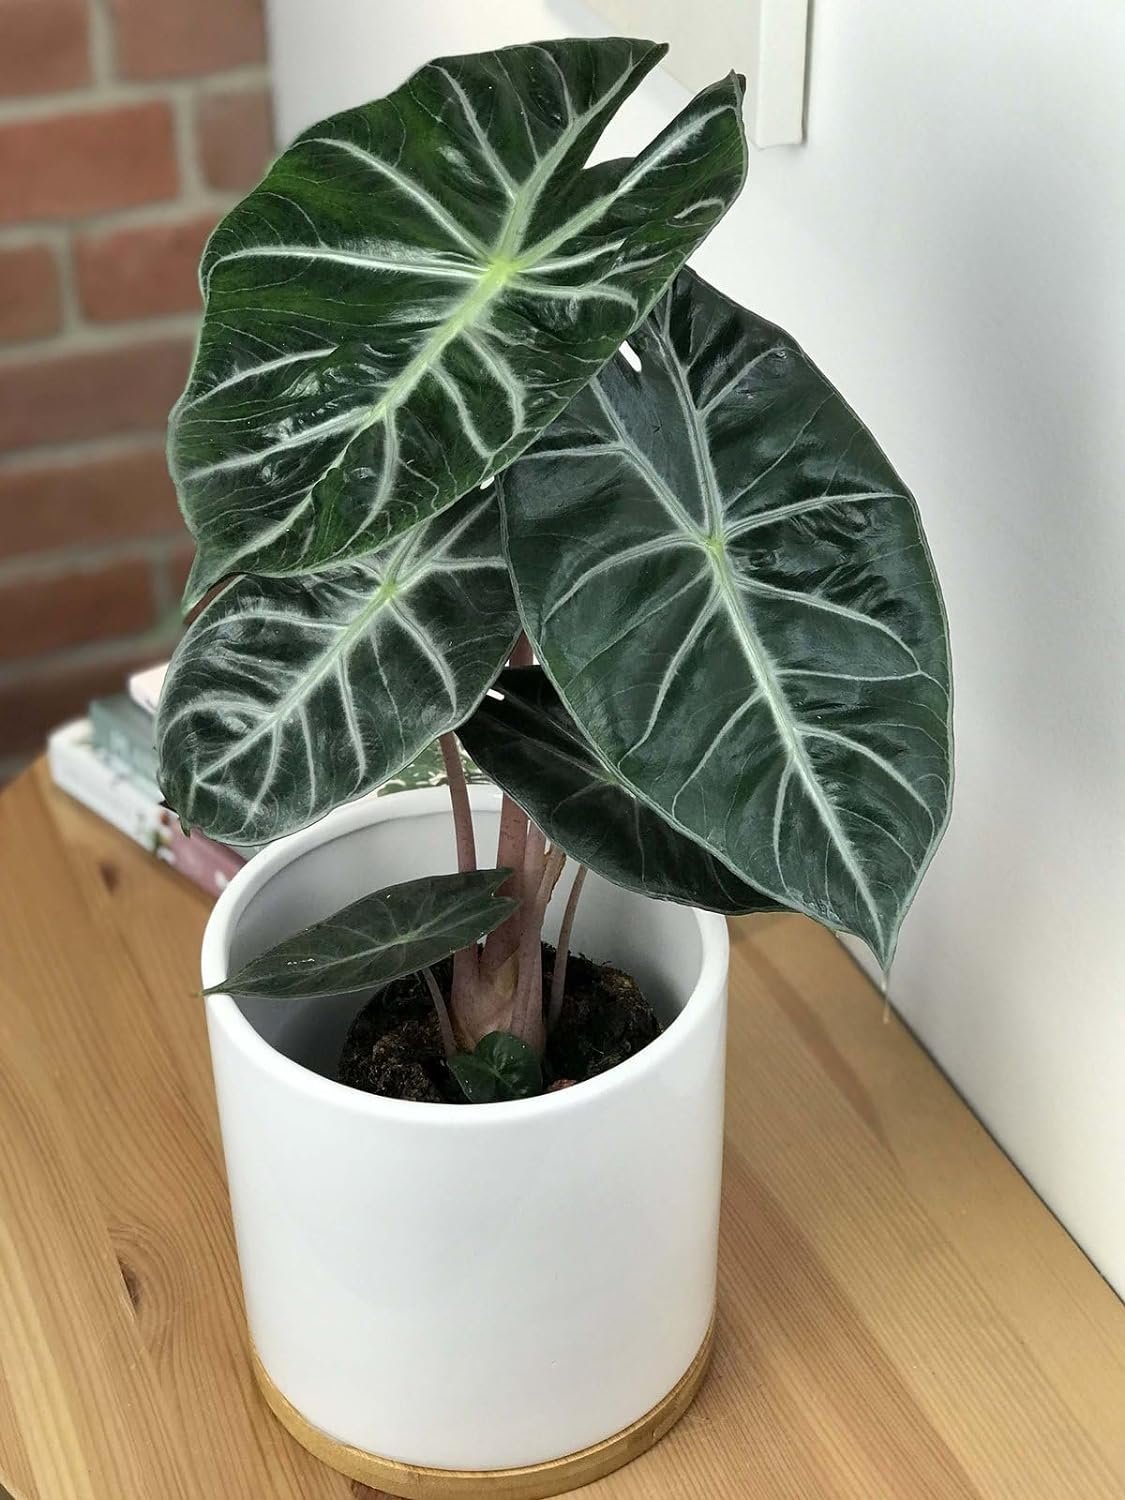 Morroco Alocasia - Live Plant in a 4 Inch Pot - Alocasia - Florist Quality Air Purifying Indoor Plant - Nature's Masterpiece in Your Home - image 5 of 5